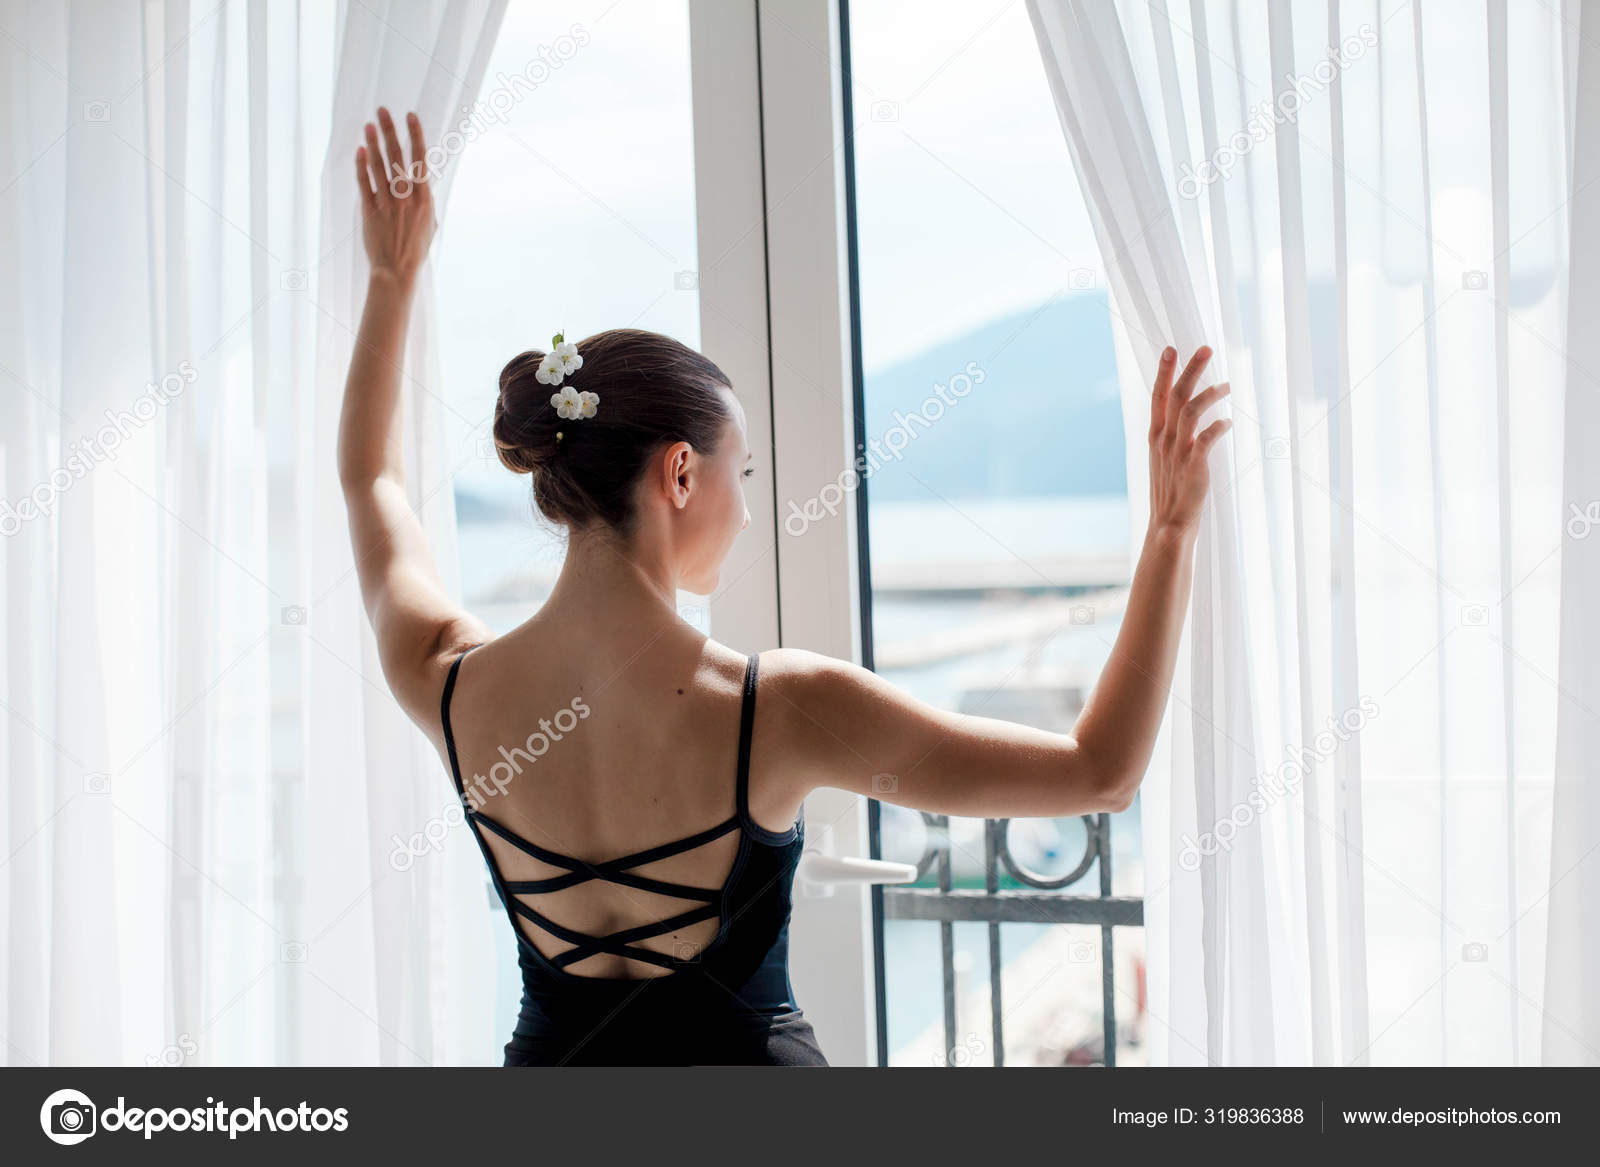 Girl is opening big window with view of sea and mountains. Ballerina has break in dance workout in ballet class room. Dancer stands Stock Photo ©Maryna_Andrejchenko 319836388